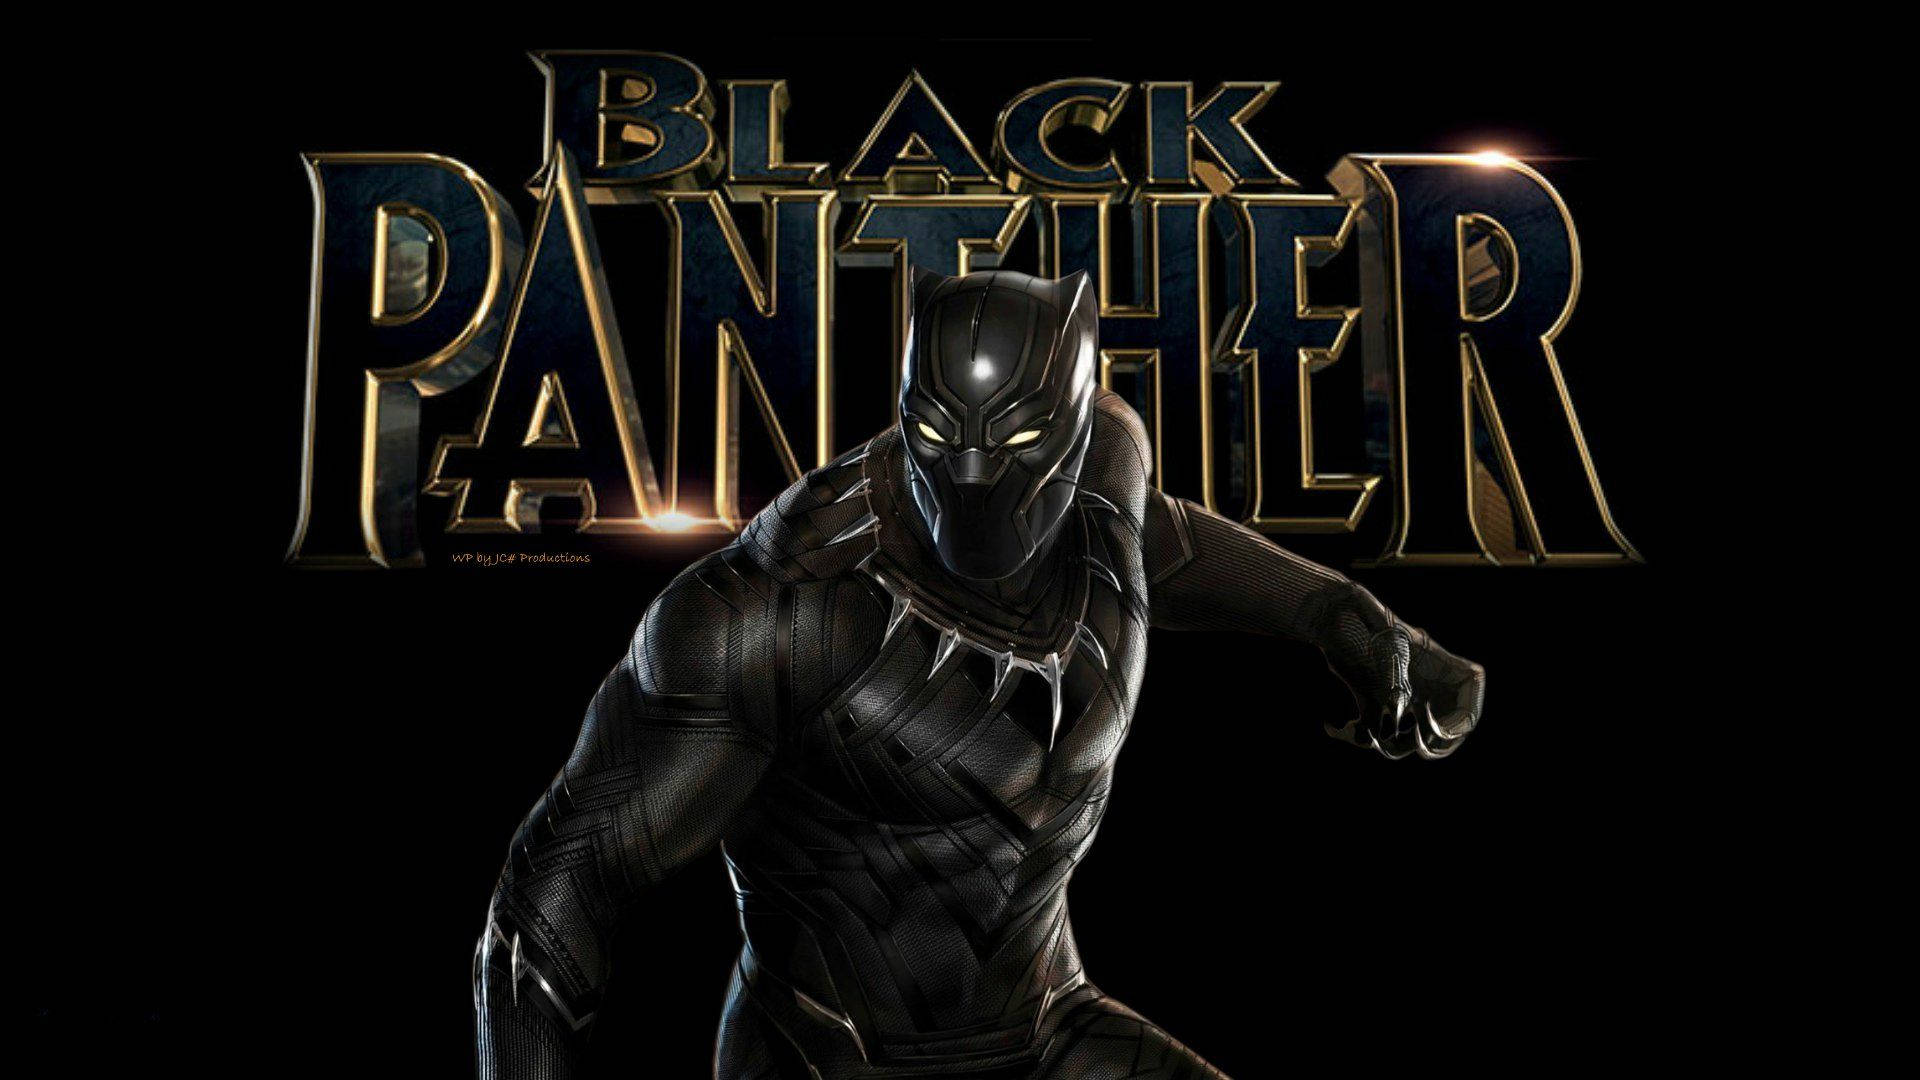 Black Panther comic book cover Wallpaper